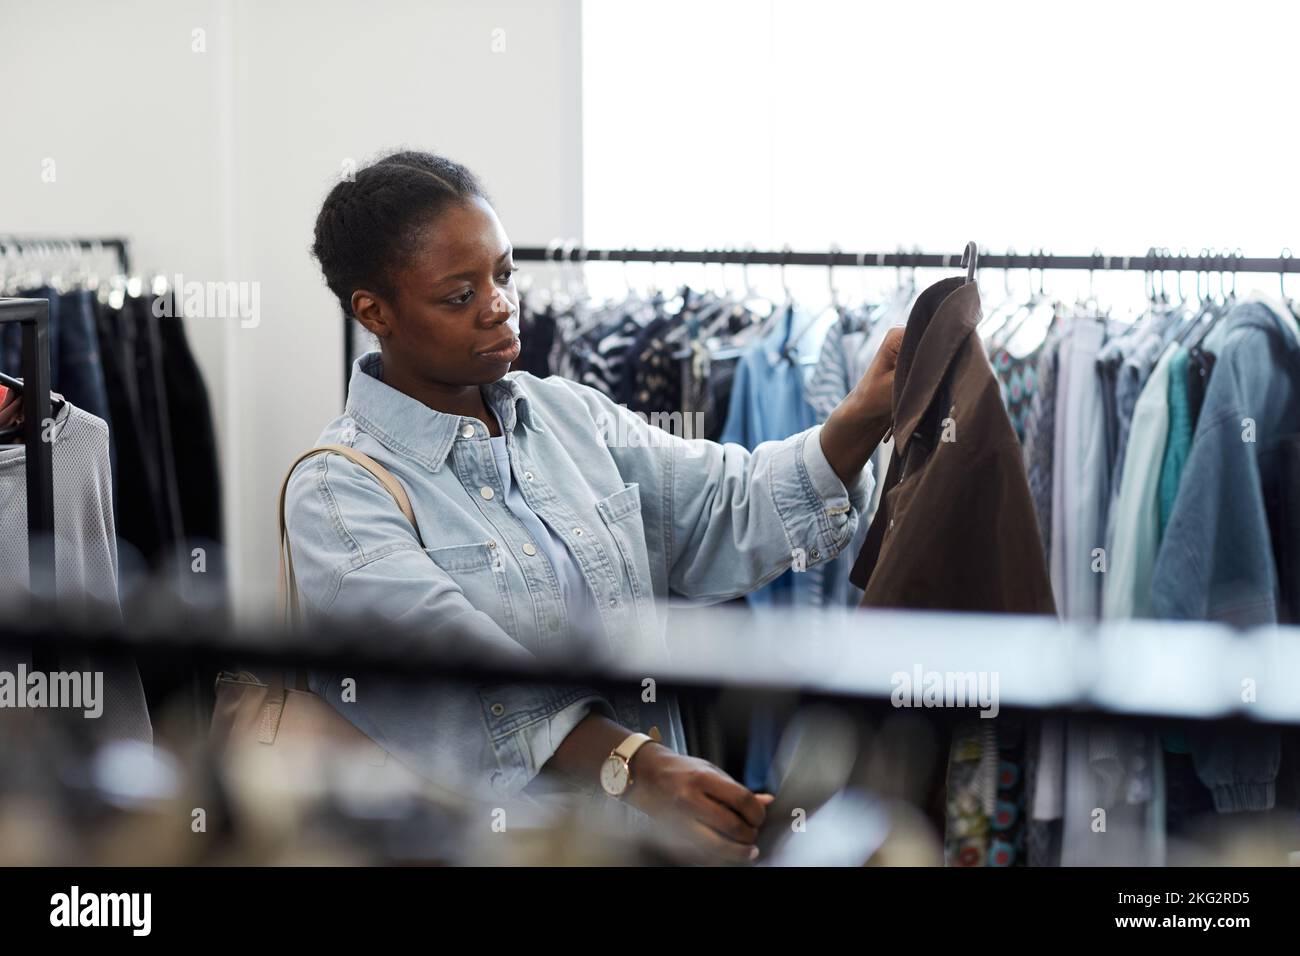 Waist up portrait of black young woman looking at clothes in thrift store Stock Photo